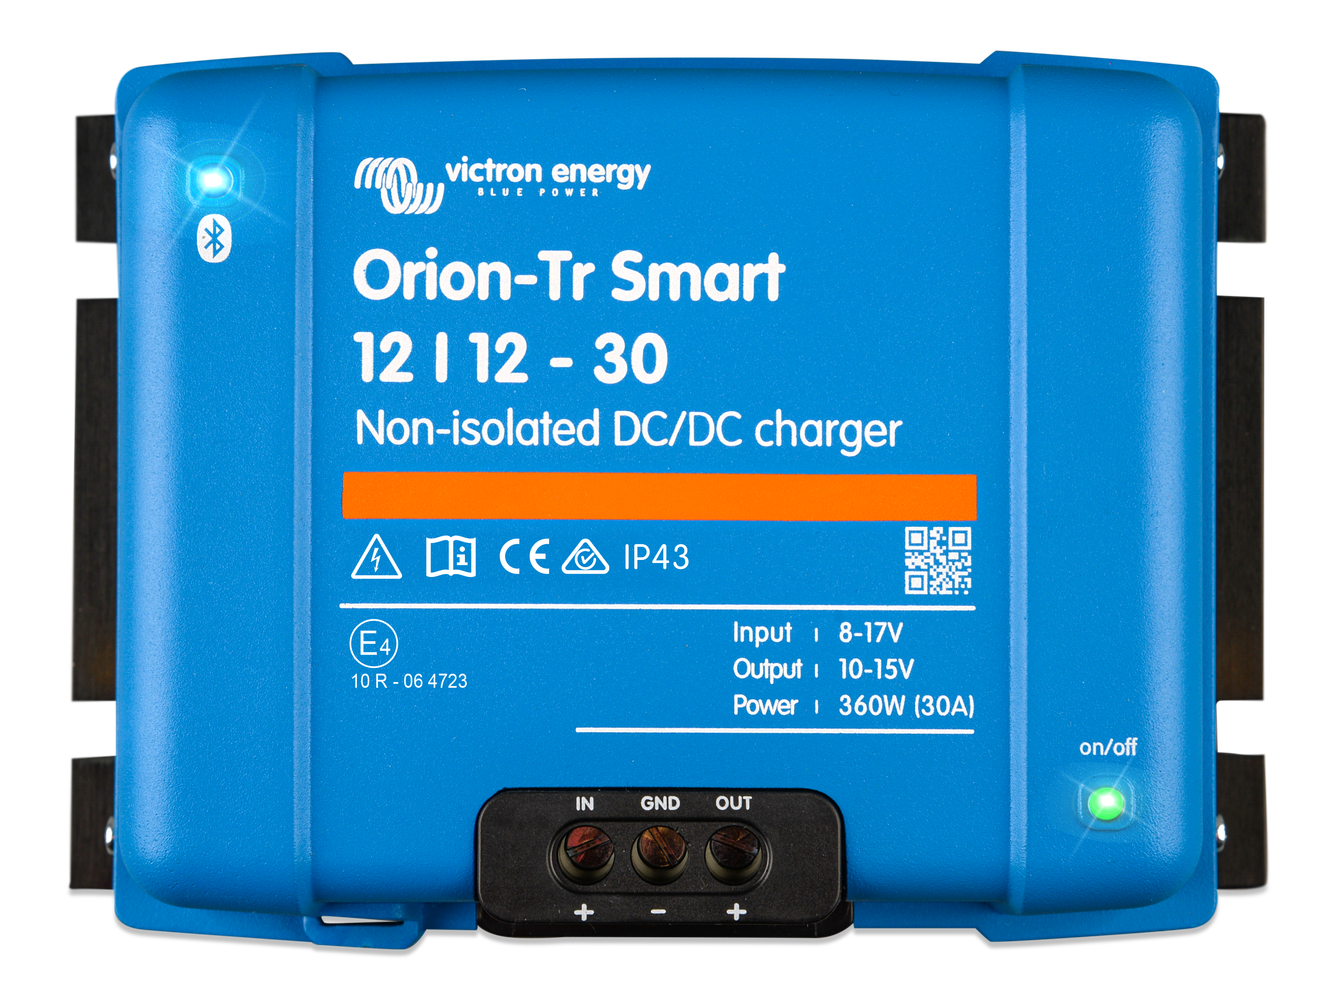 https://www.victronenergy.com/upload/cache/1642431839_upload_documents_1550_1000-ORI121236140_Orion-Tr-Smart%2012-12-30A%20%28360W%29%20Non-isolated%20DC-DC%20charger%20%28top%29.png